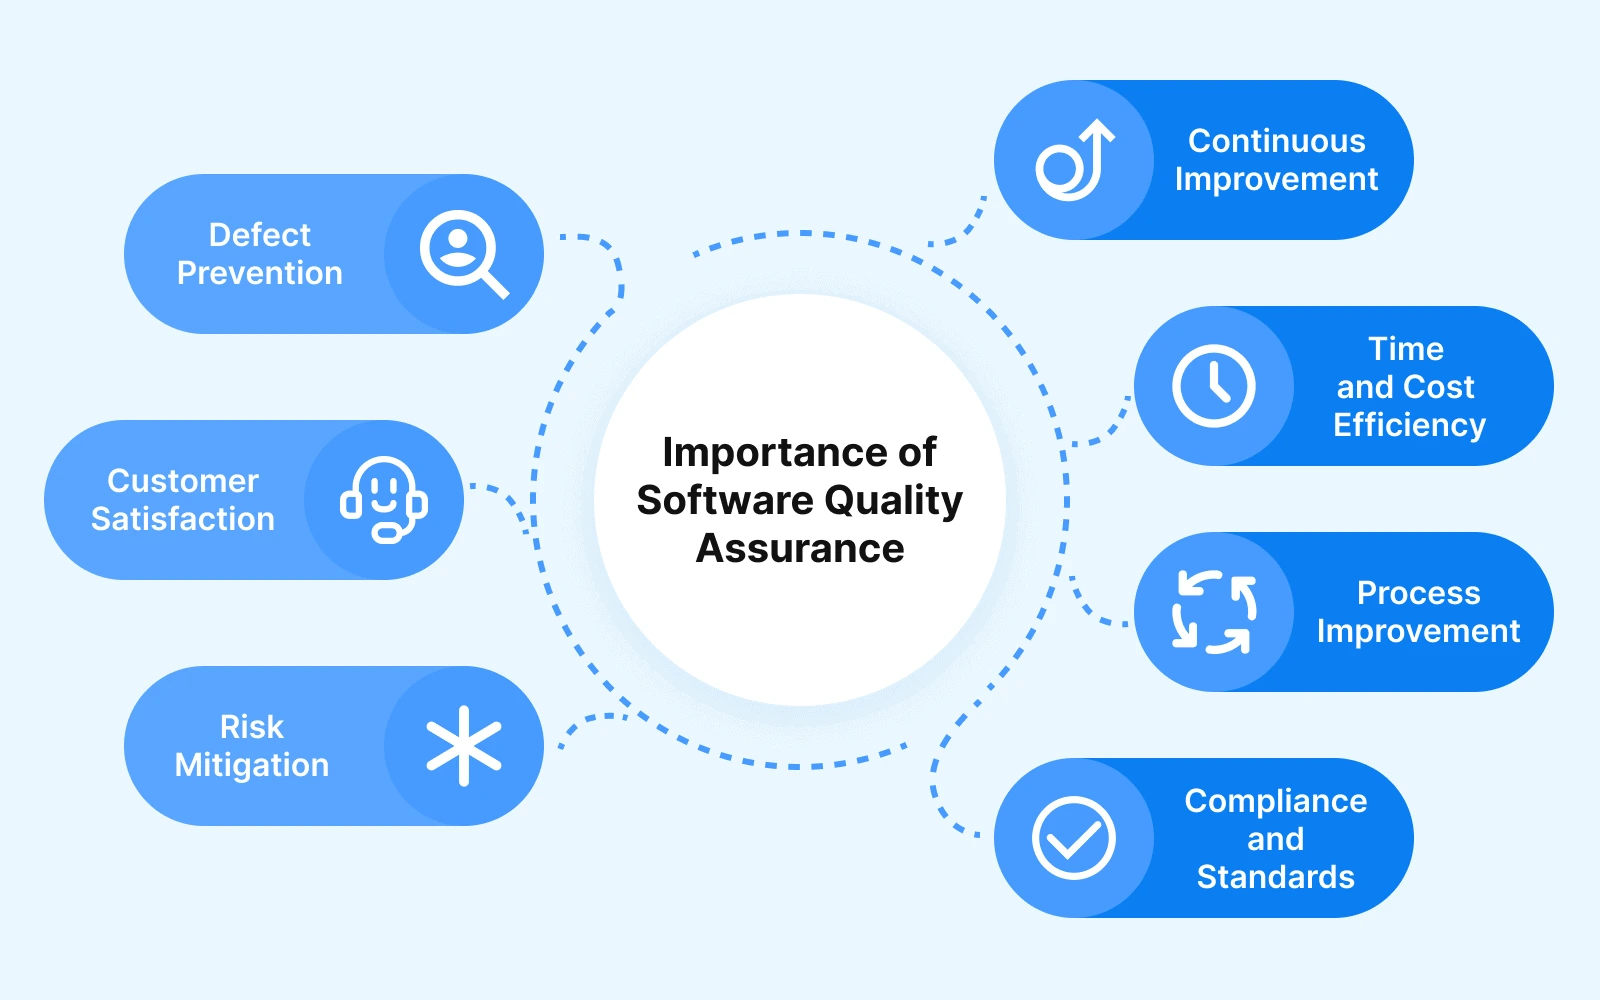 Importance of Software Quality Assurance